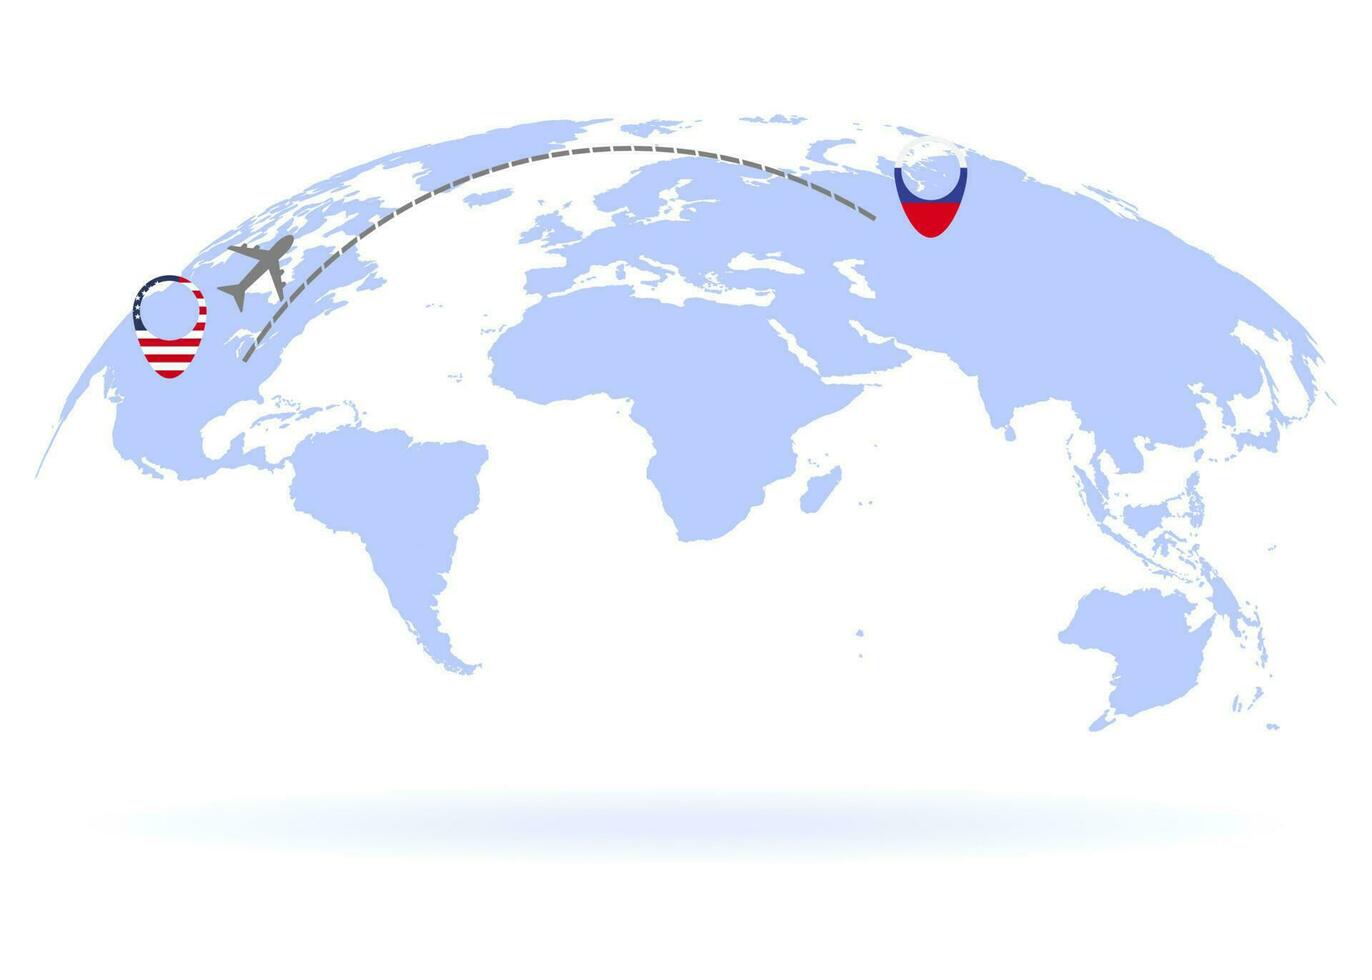 Flight from USA to Russia above world map. Airplane arrives to Russia. The world map. Airplane line path. Vector illustration. EPS 10